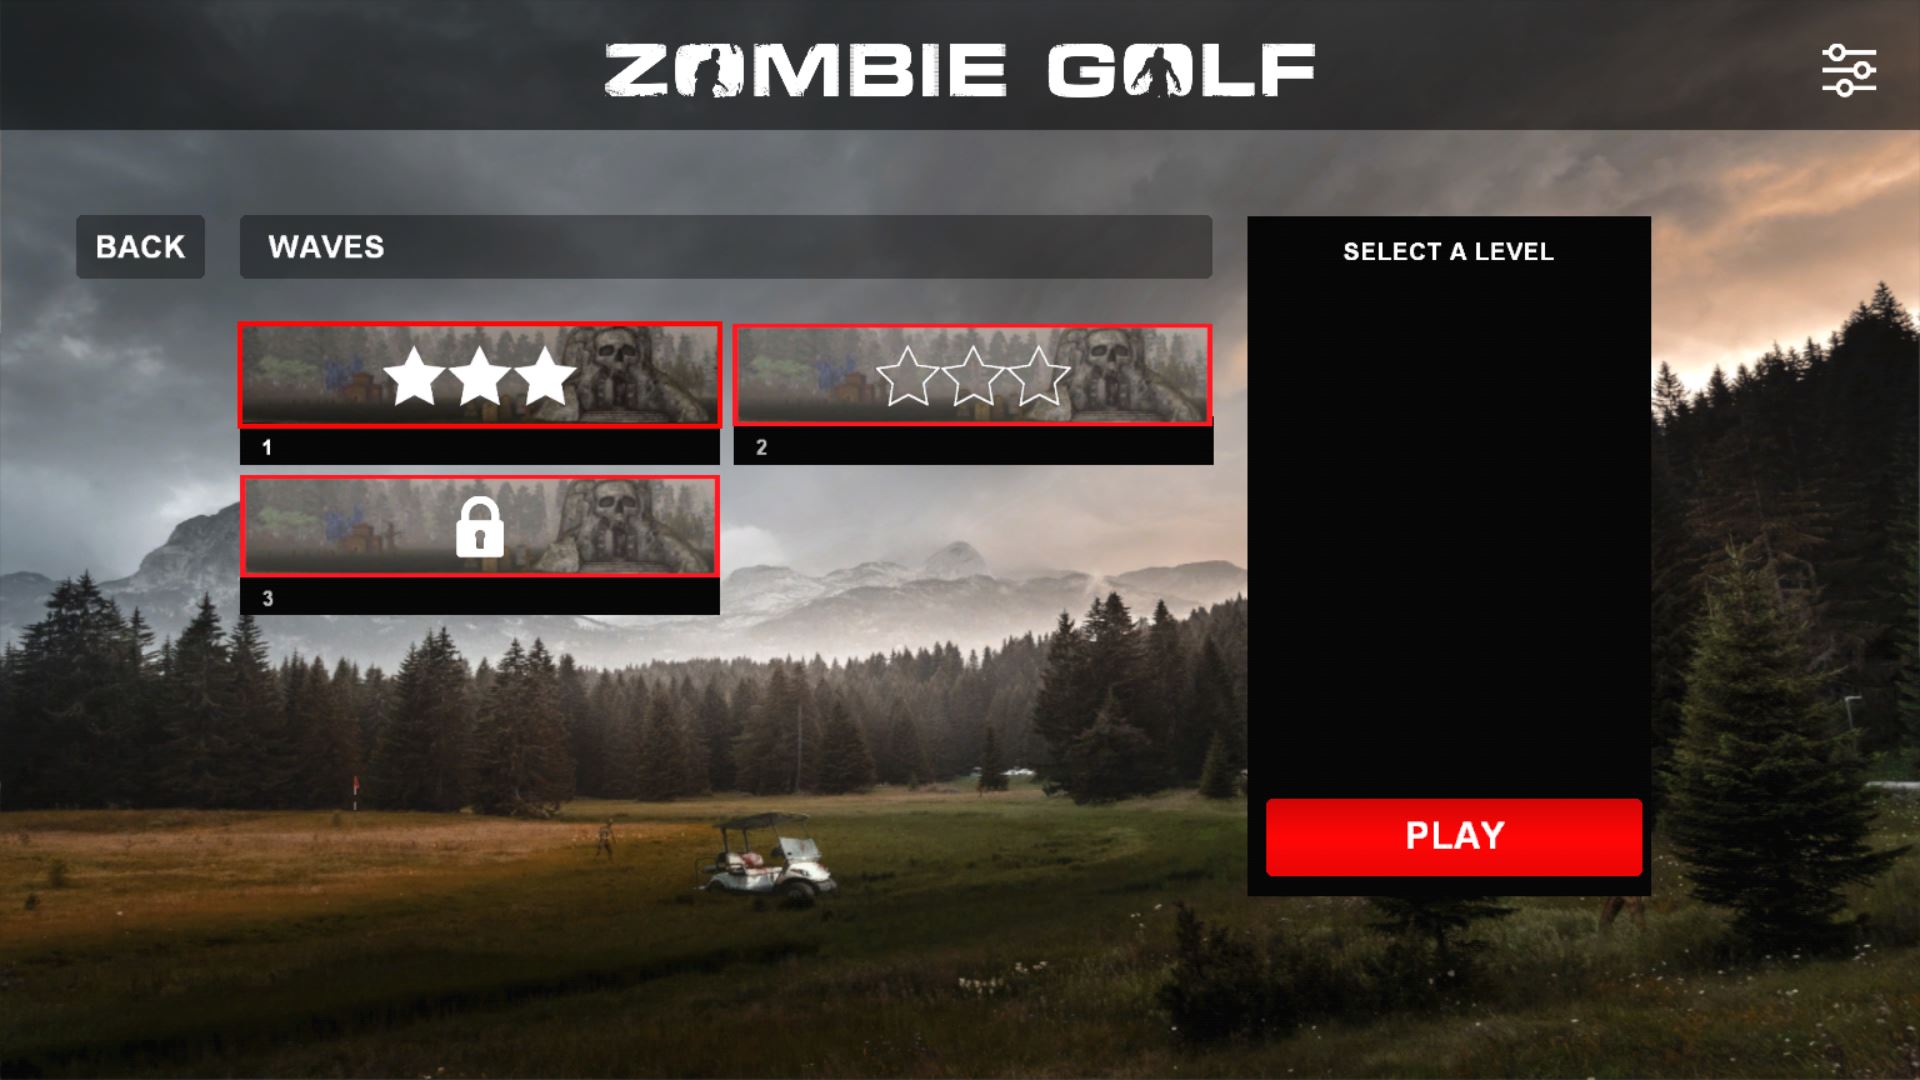 Zombie Golf Waves Launch Screen